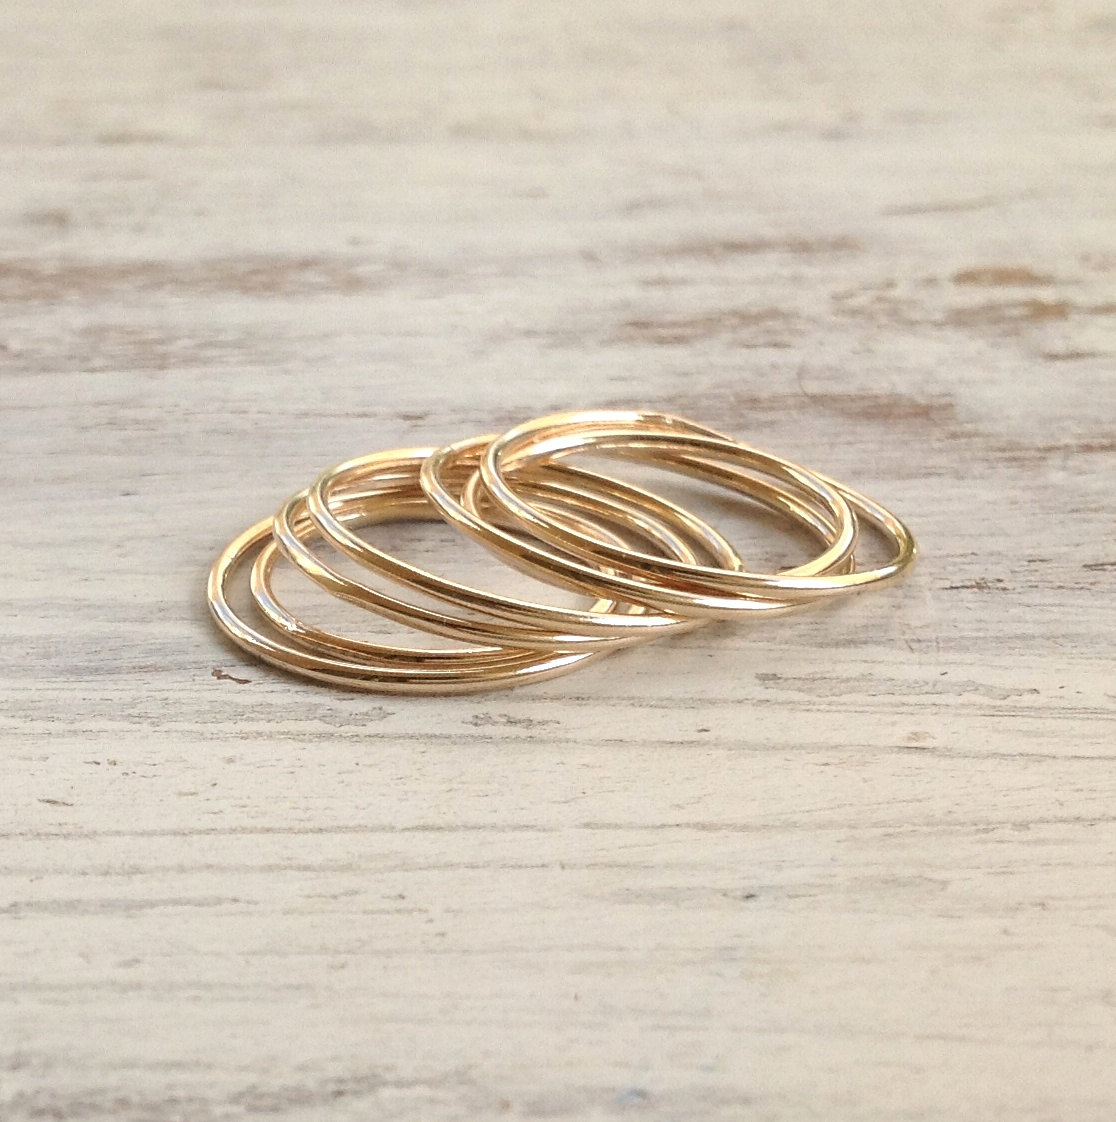 Knuckle Ring, Stacking Rings, Thin Ring, Gold Knuckle Ring, Simple Ring, Smooth Ring - 1001